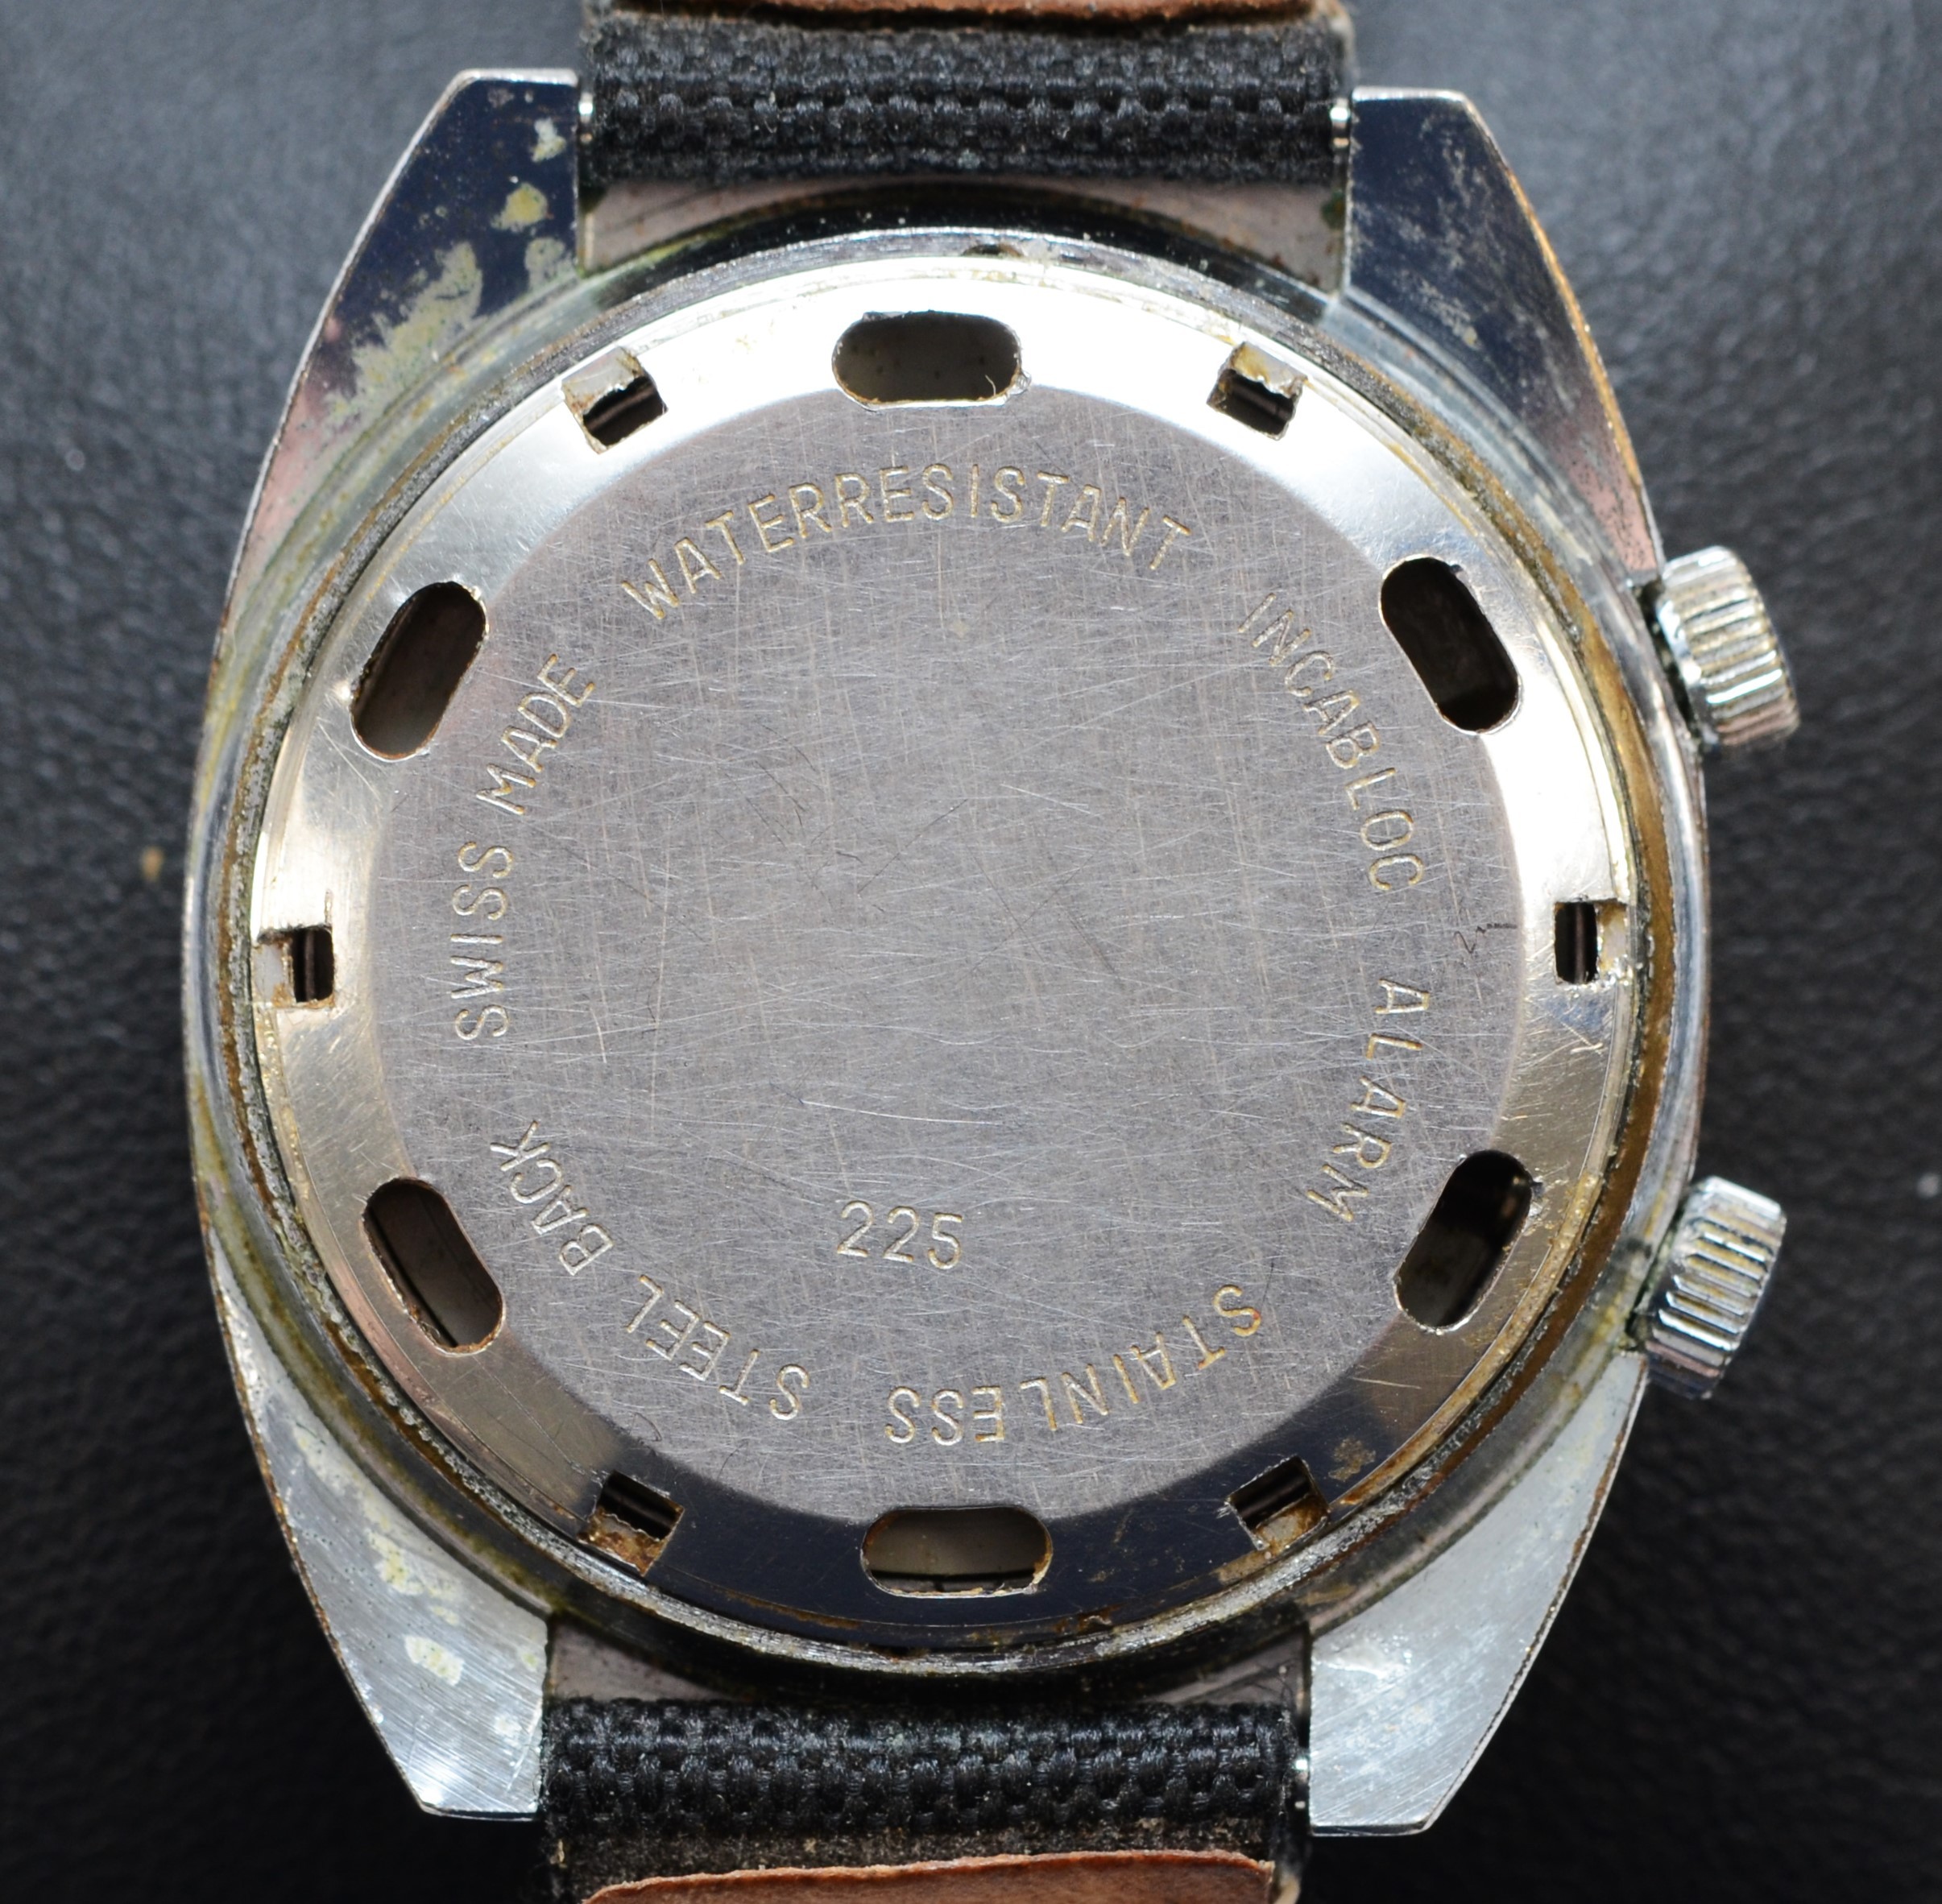 Jaquet-Droz, a stainless steel manual wind alarm and date gentleman's wristwatch, c.1970's, ref 225, - Image 3 of 5